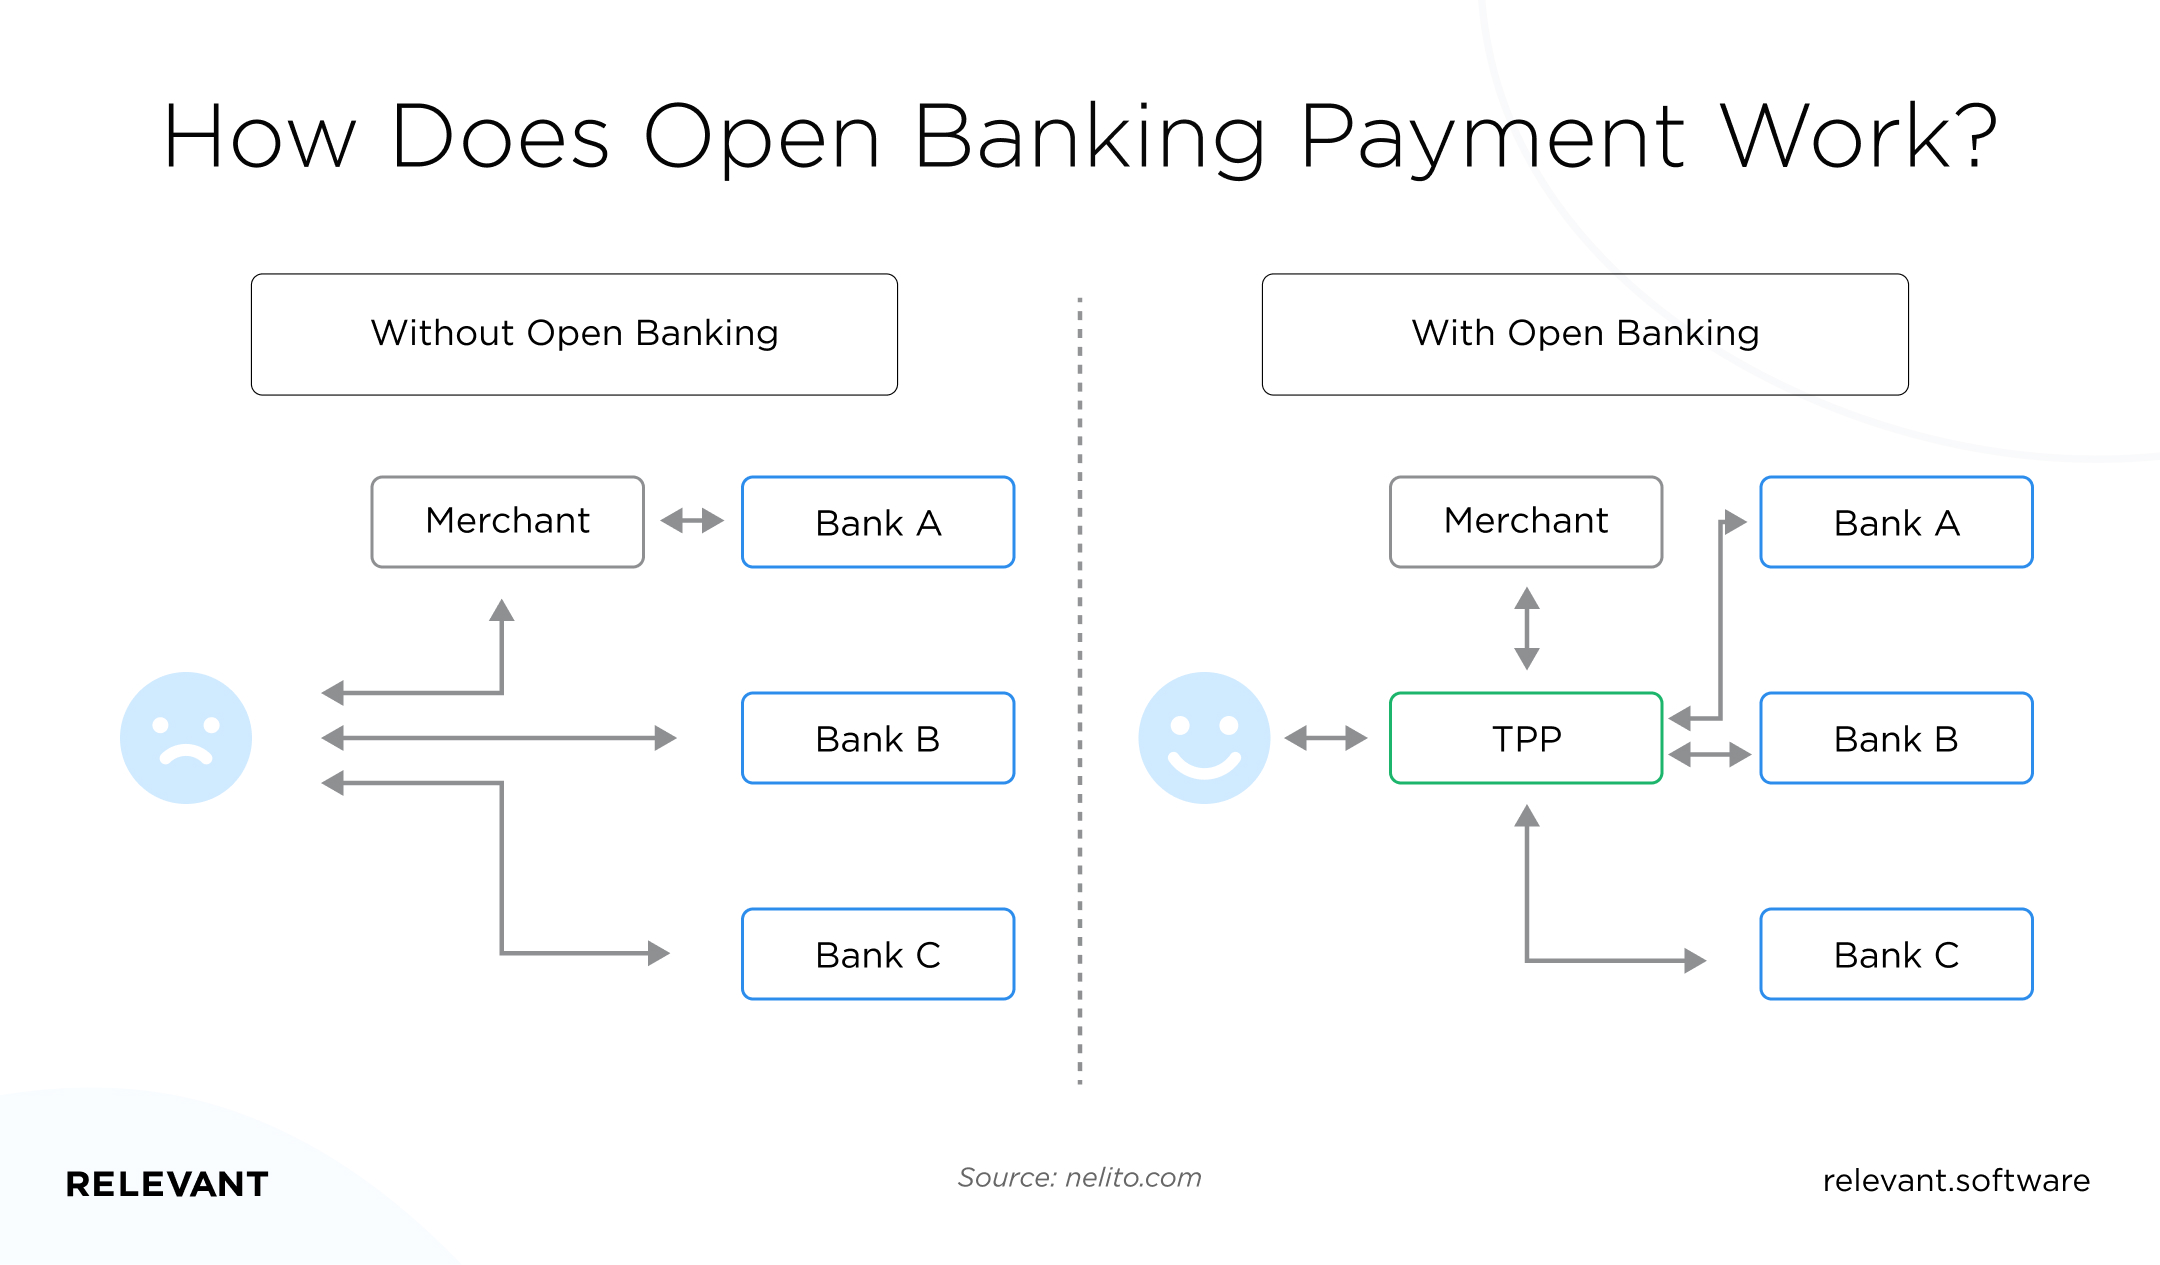 How Does Open Banking Payment Work?